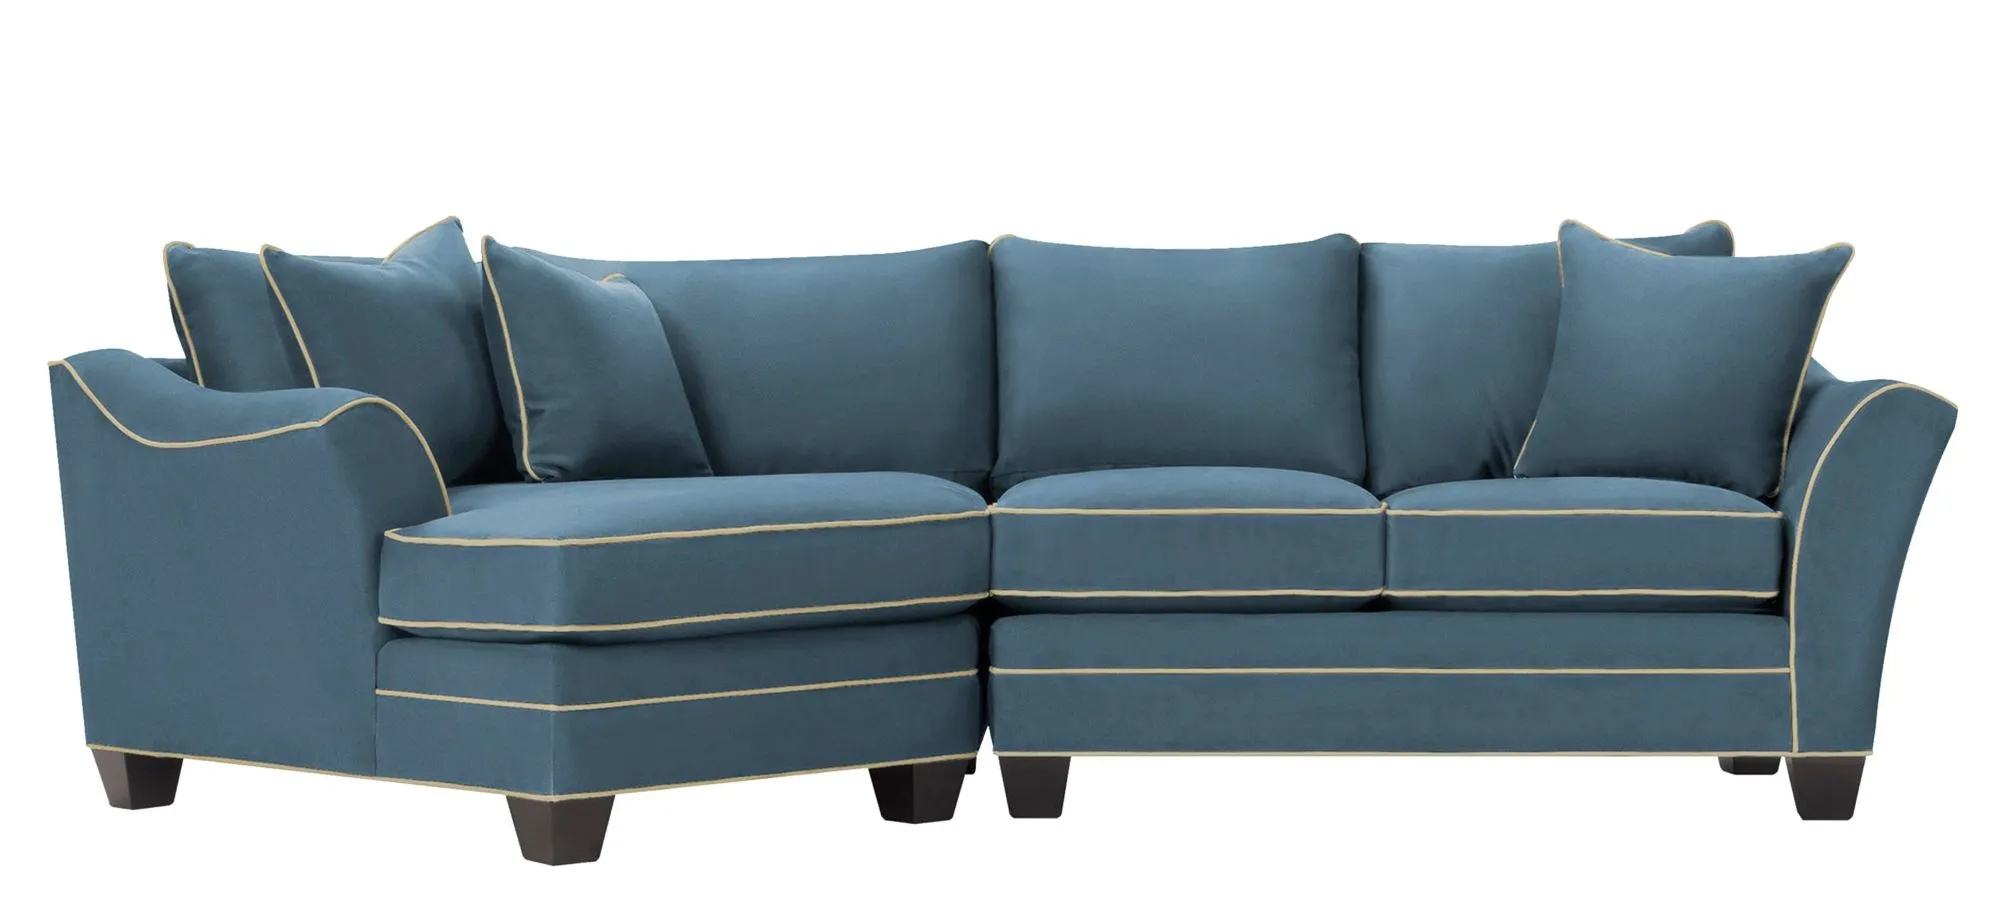 Foresthill 2-pc. Left Hand Cuddler Sectional Sofa in Suede So Soft Indigo/Mineral by H.M. Richards